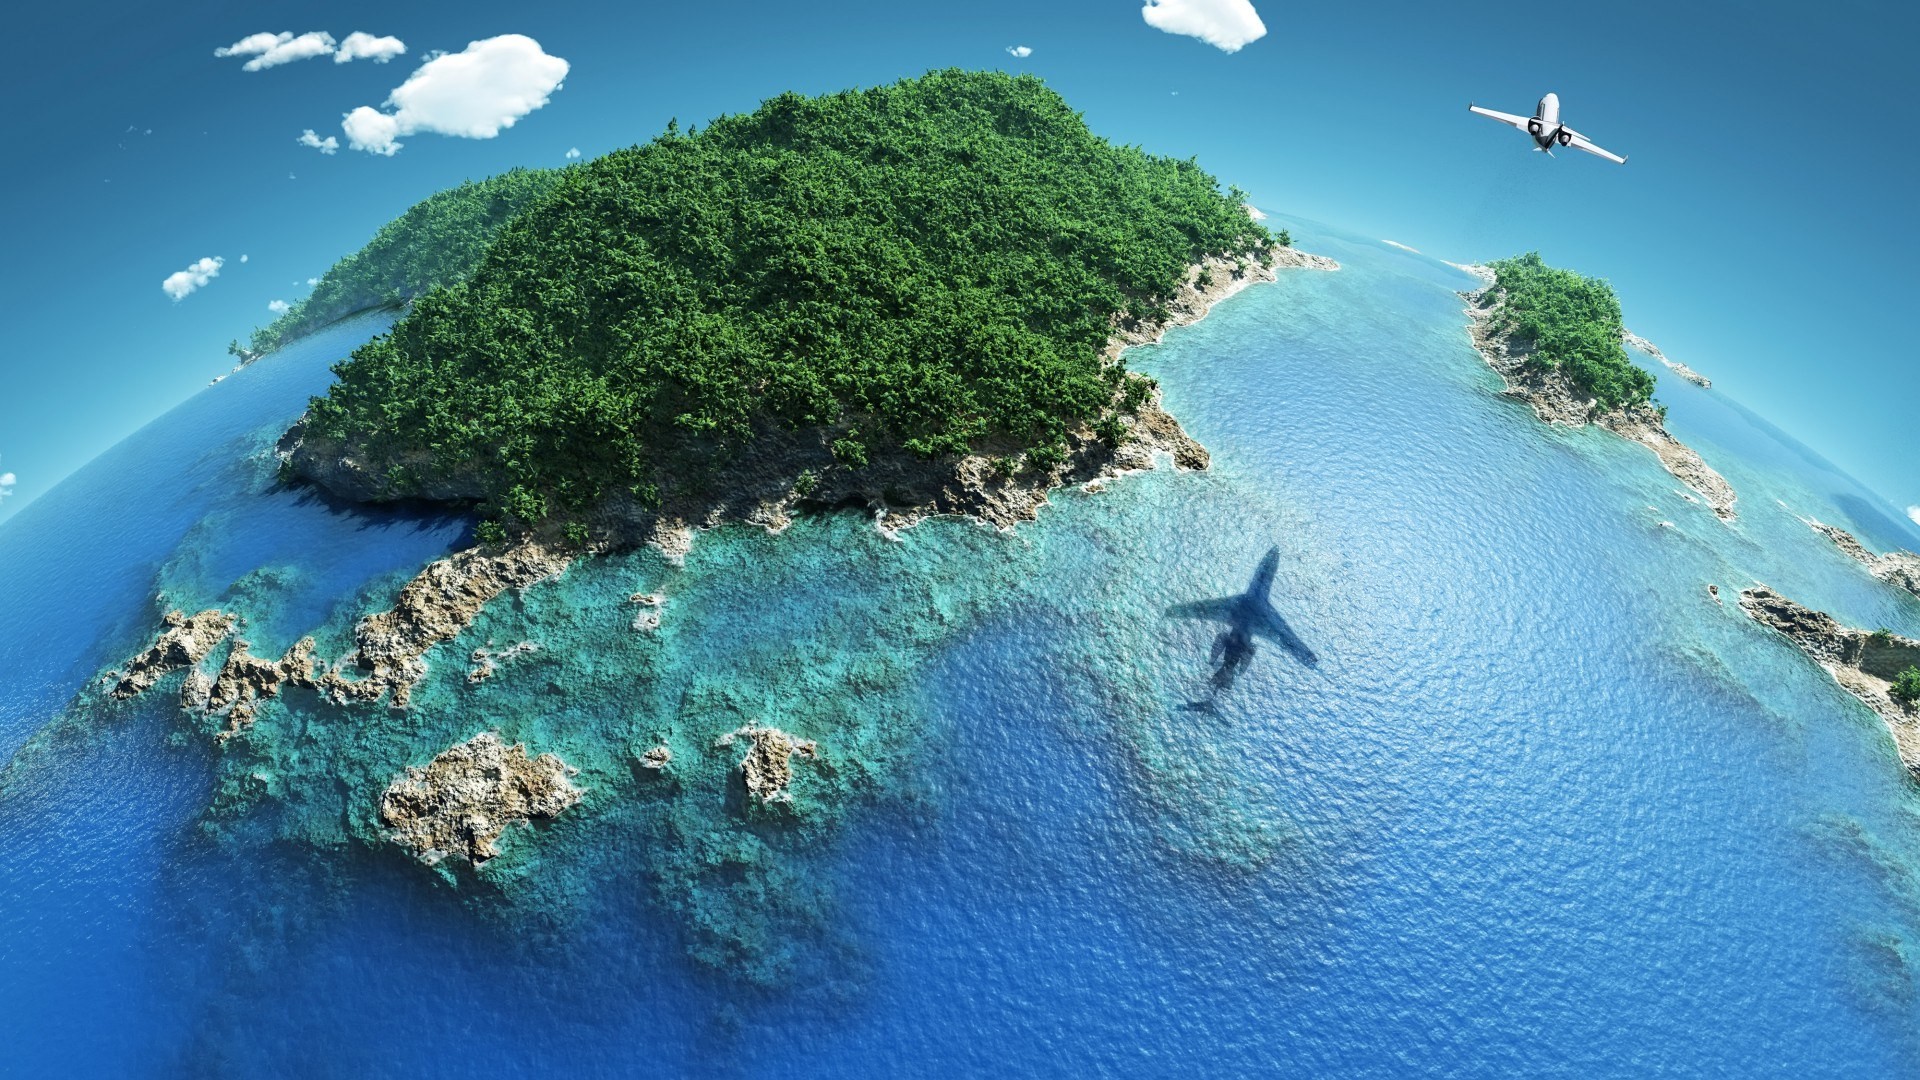 General 1920x1080 nature landscape sea coast island photo manipulation coral reef fisheye lens clouds trees forest airplane shadow aerial view digital art